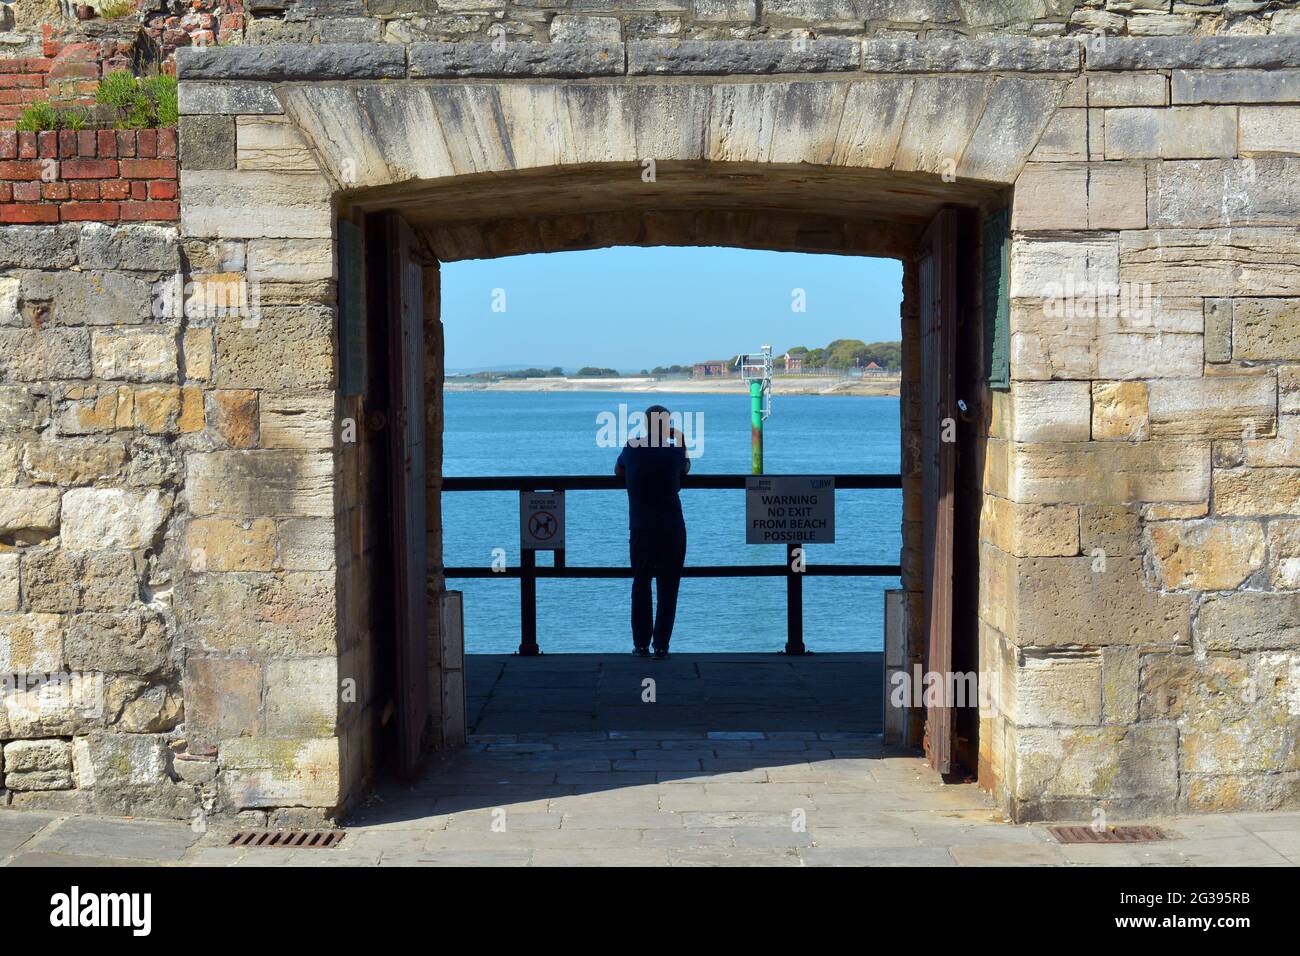 A man stands looking out to sea, with his hand on his face it gives a sense of thinking or pondering. Stock Photo